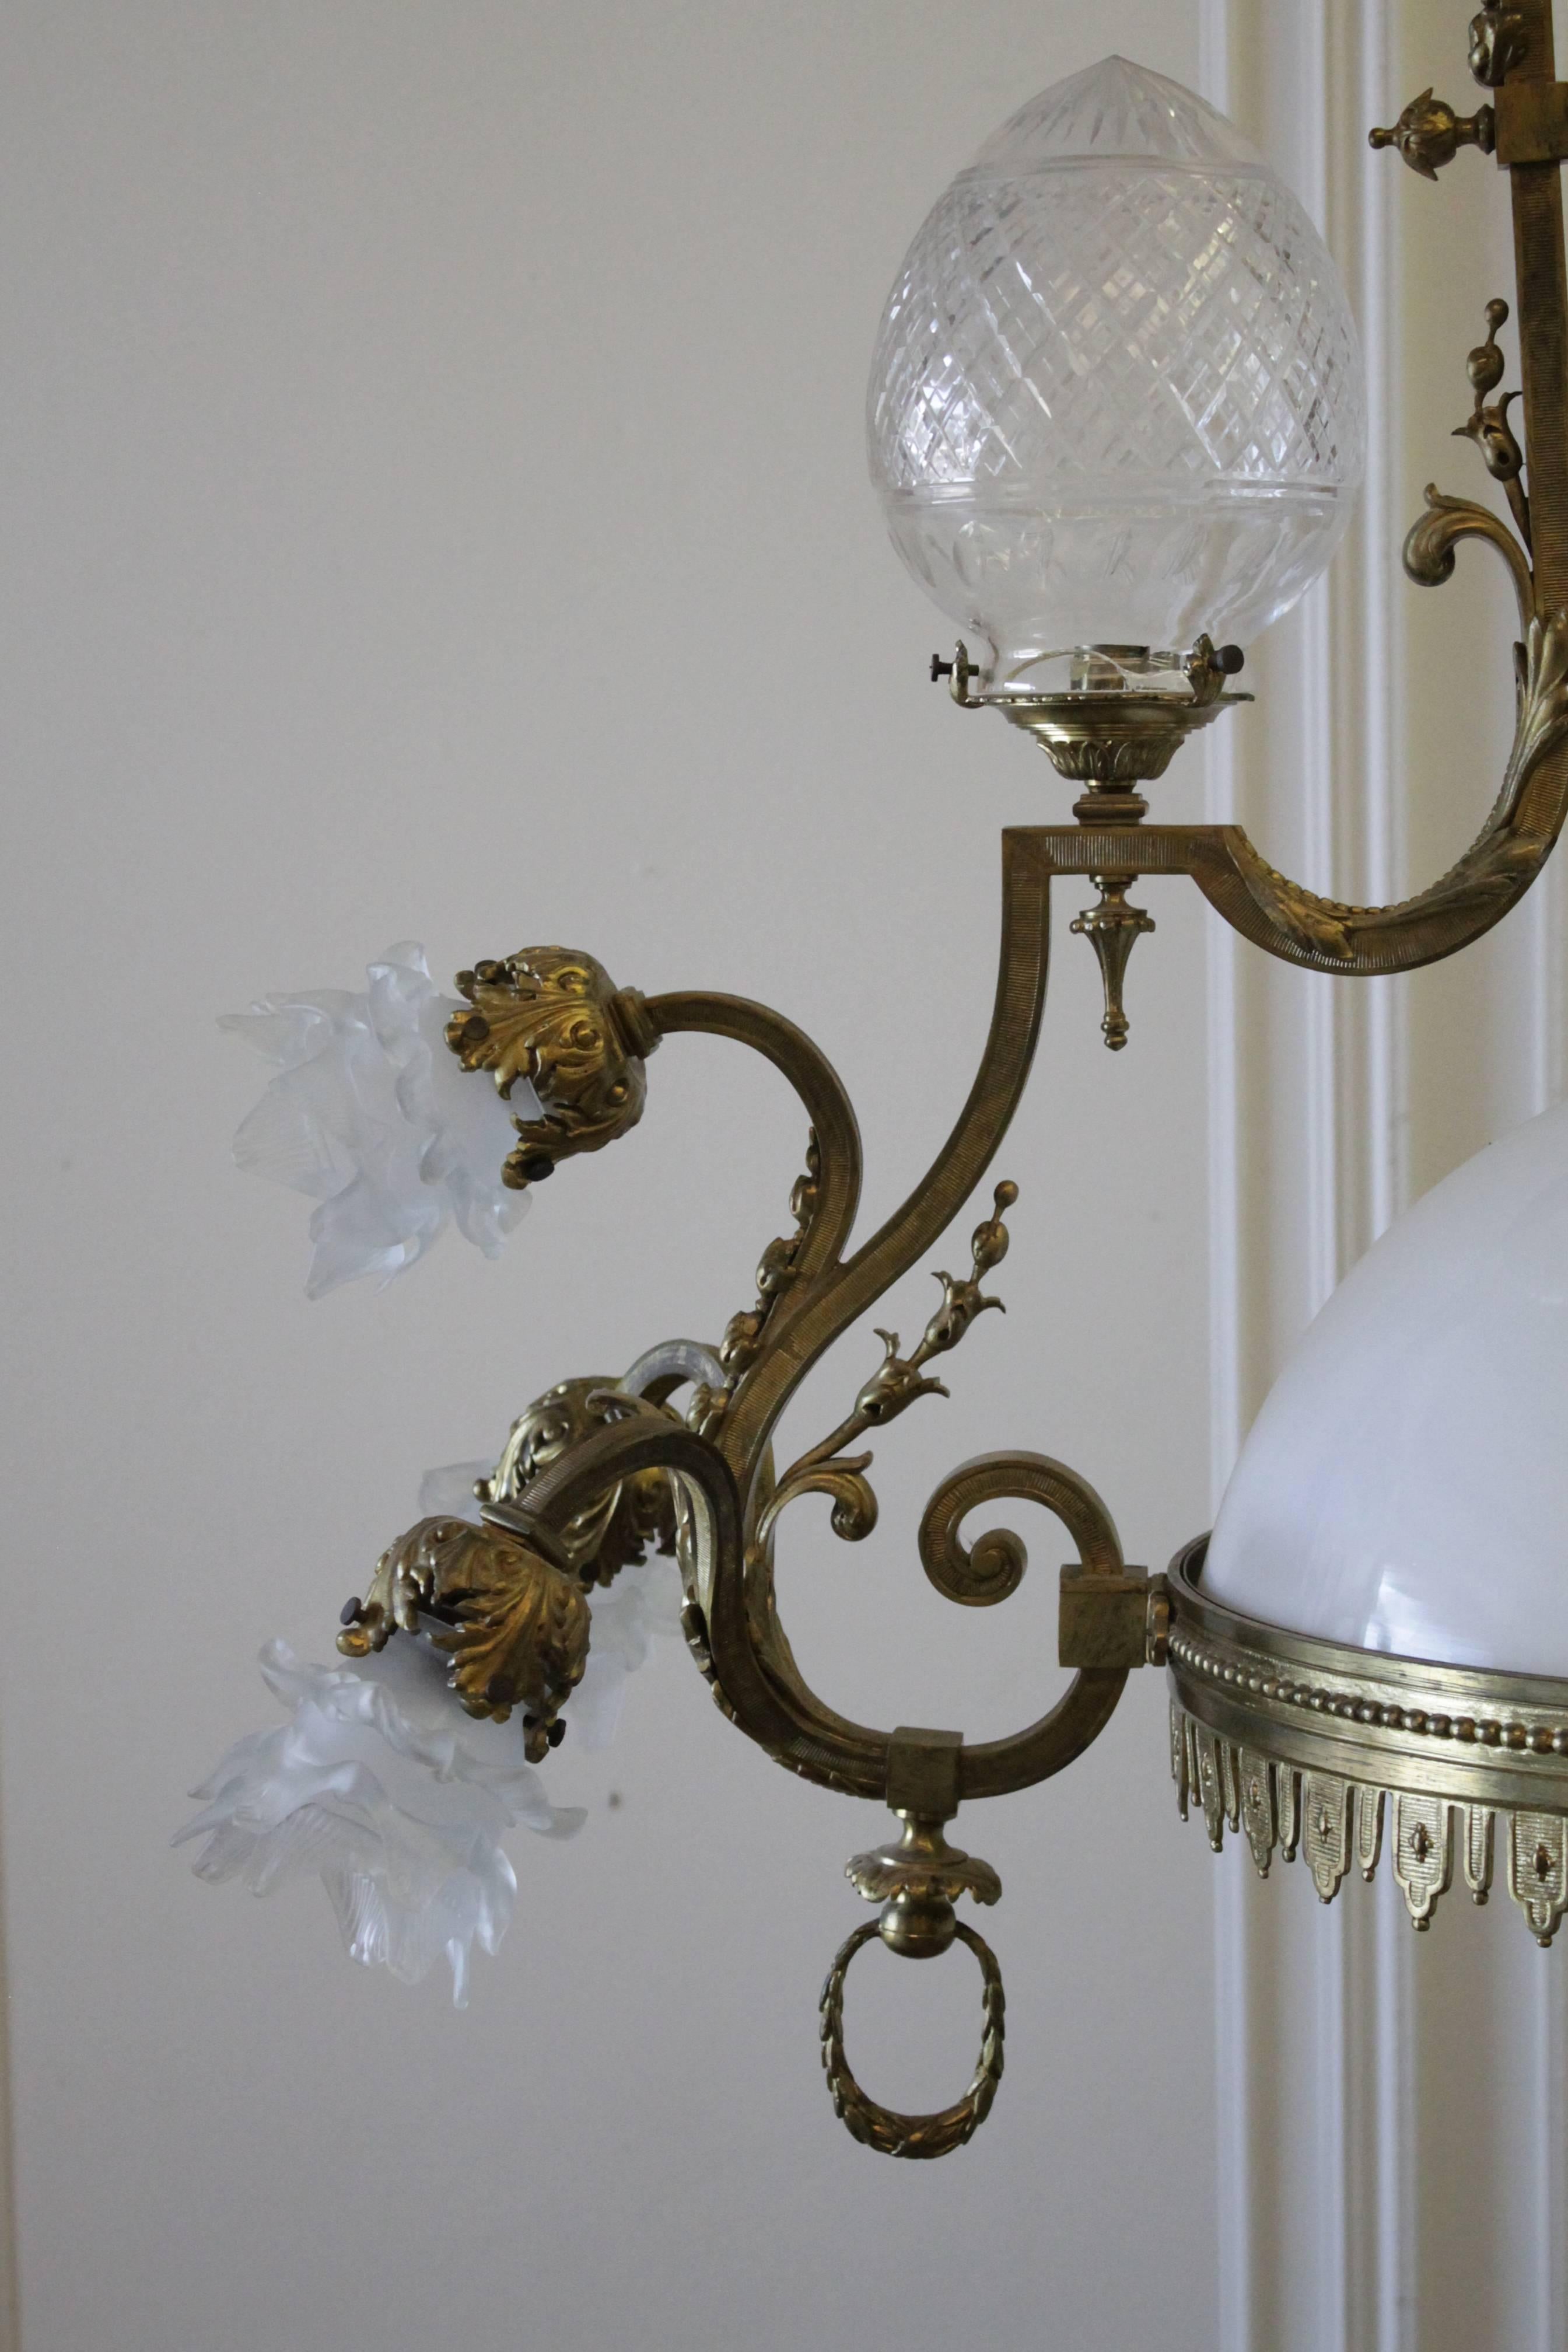 Neoclassical Revival French Belle Epoque 19th-20th Century Neoclassical Style Gilt-Bronze Chandelier